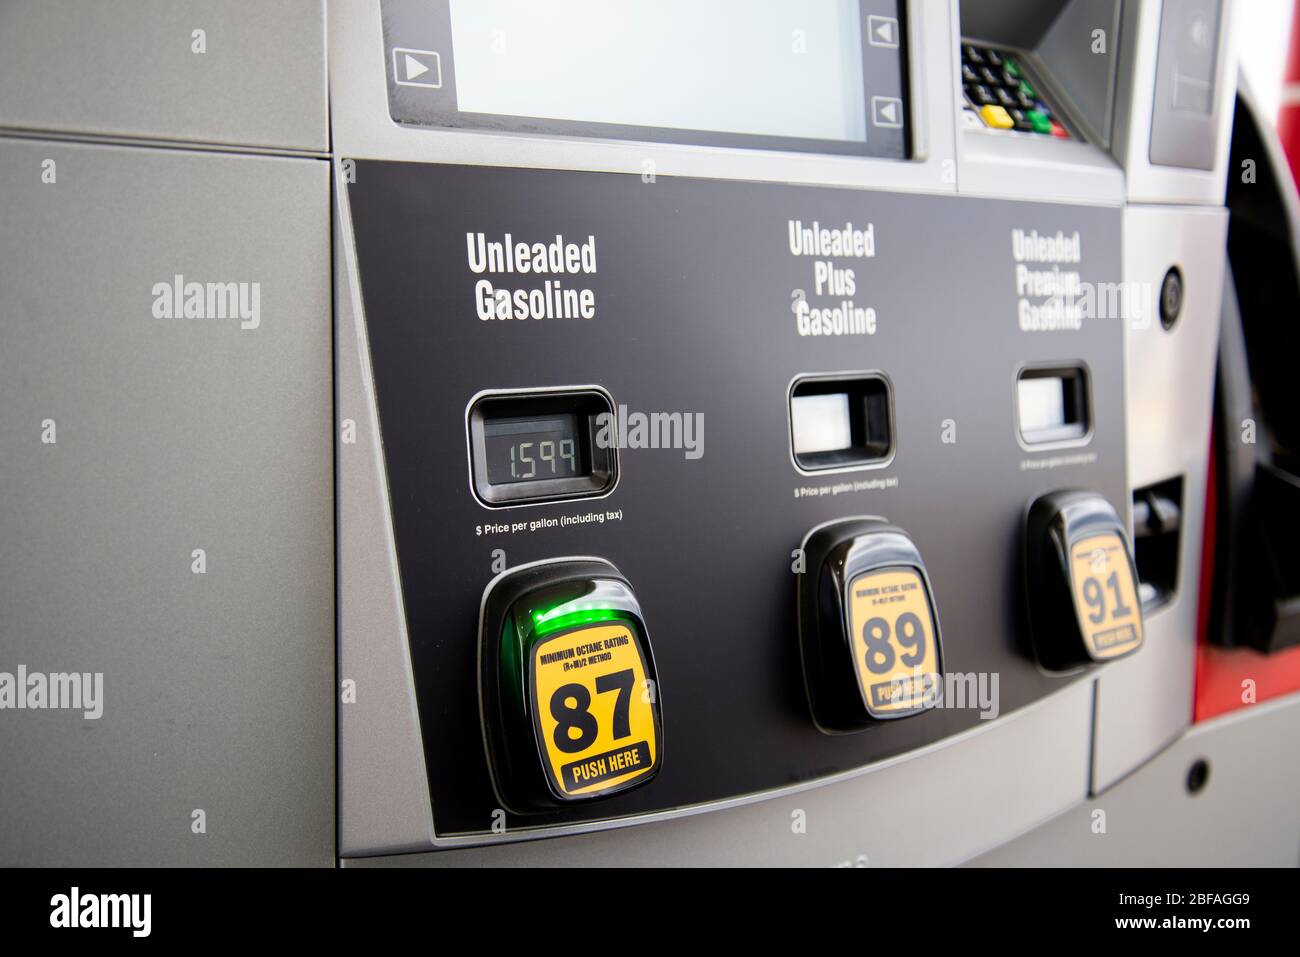 Helena, Montana - April 10, 2020: Gas pump with low unleaded gas prices during Coronavirus Covid-19 pandemic and shutdown. Reduced oil prices at Safew Stock Photo